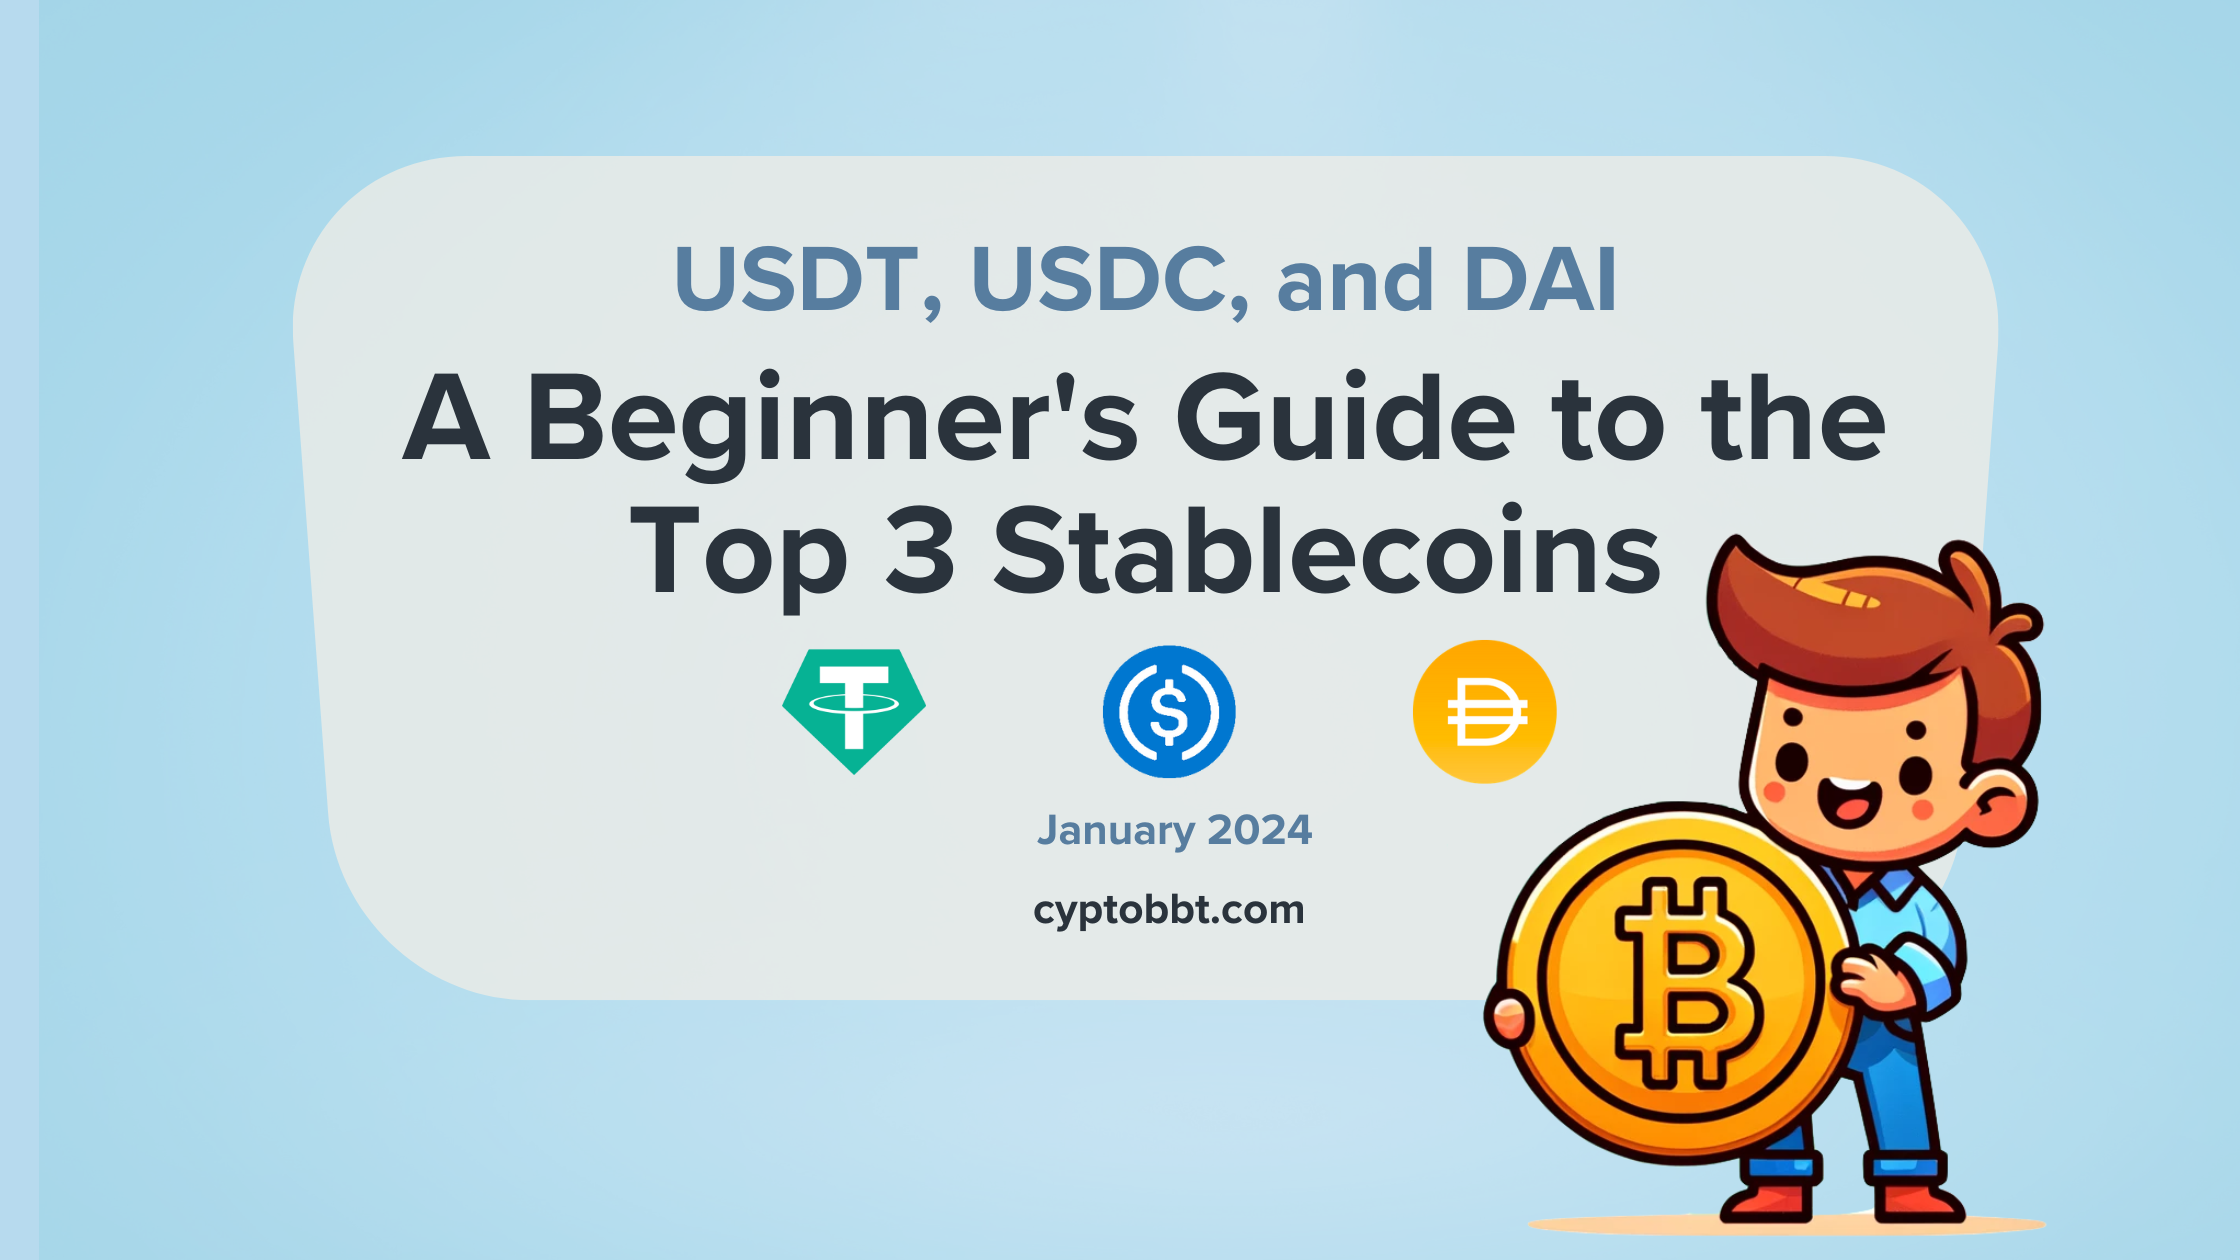 Beginner’s Guide to the Top 3 Stablecoins: USDT, USDC, DAI